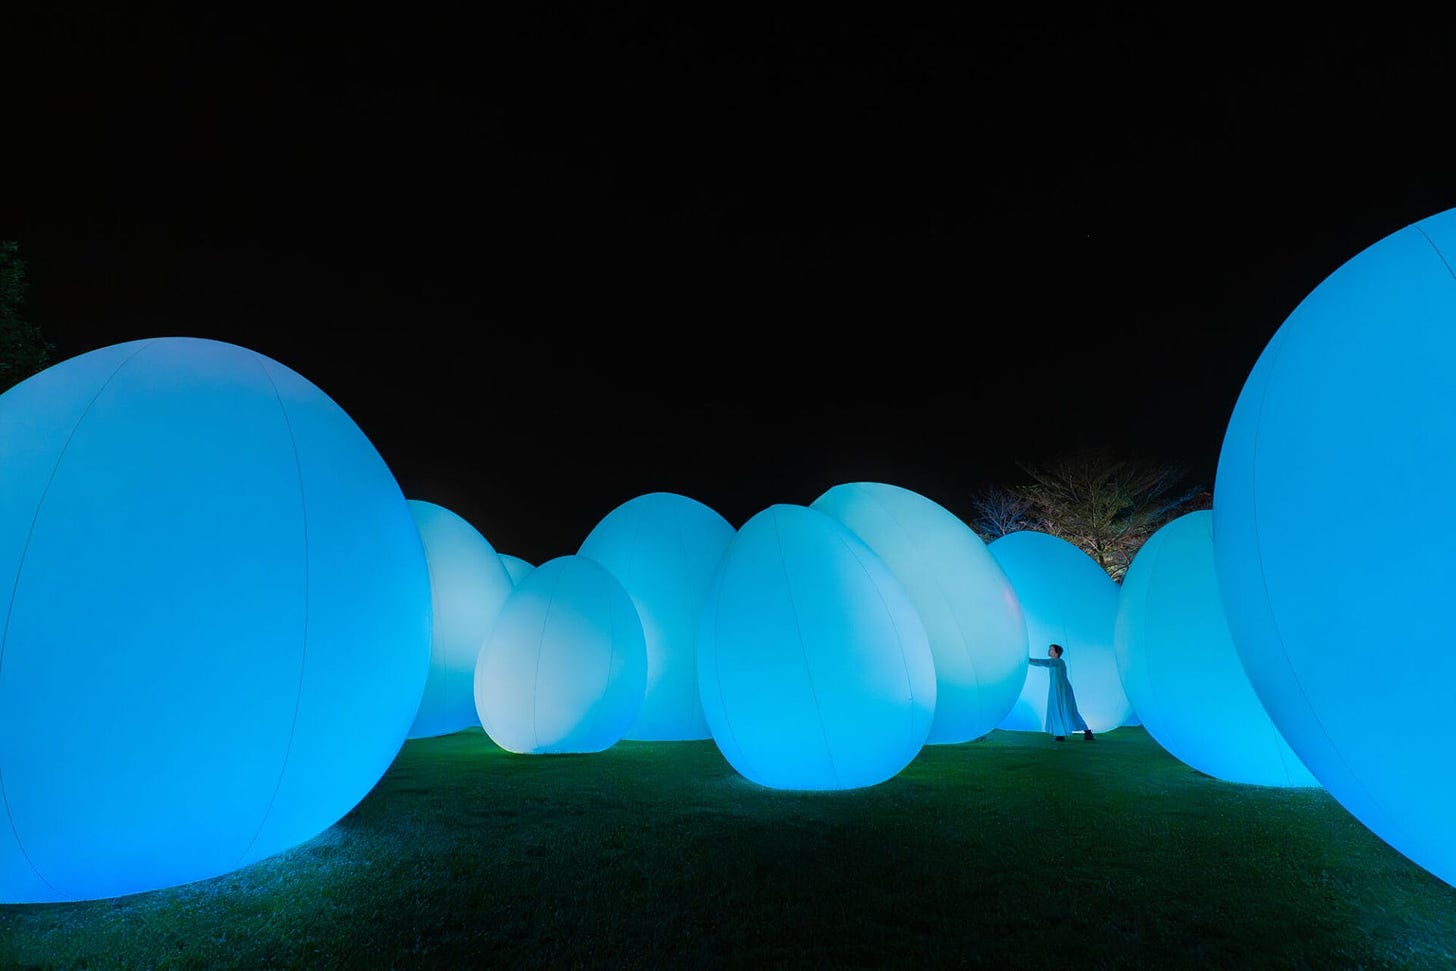 Glowing blue ovoid forms. They tower in height compared to the human standing next to them.